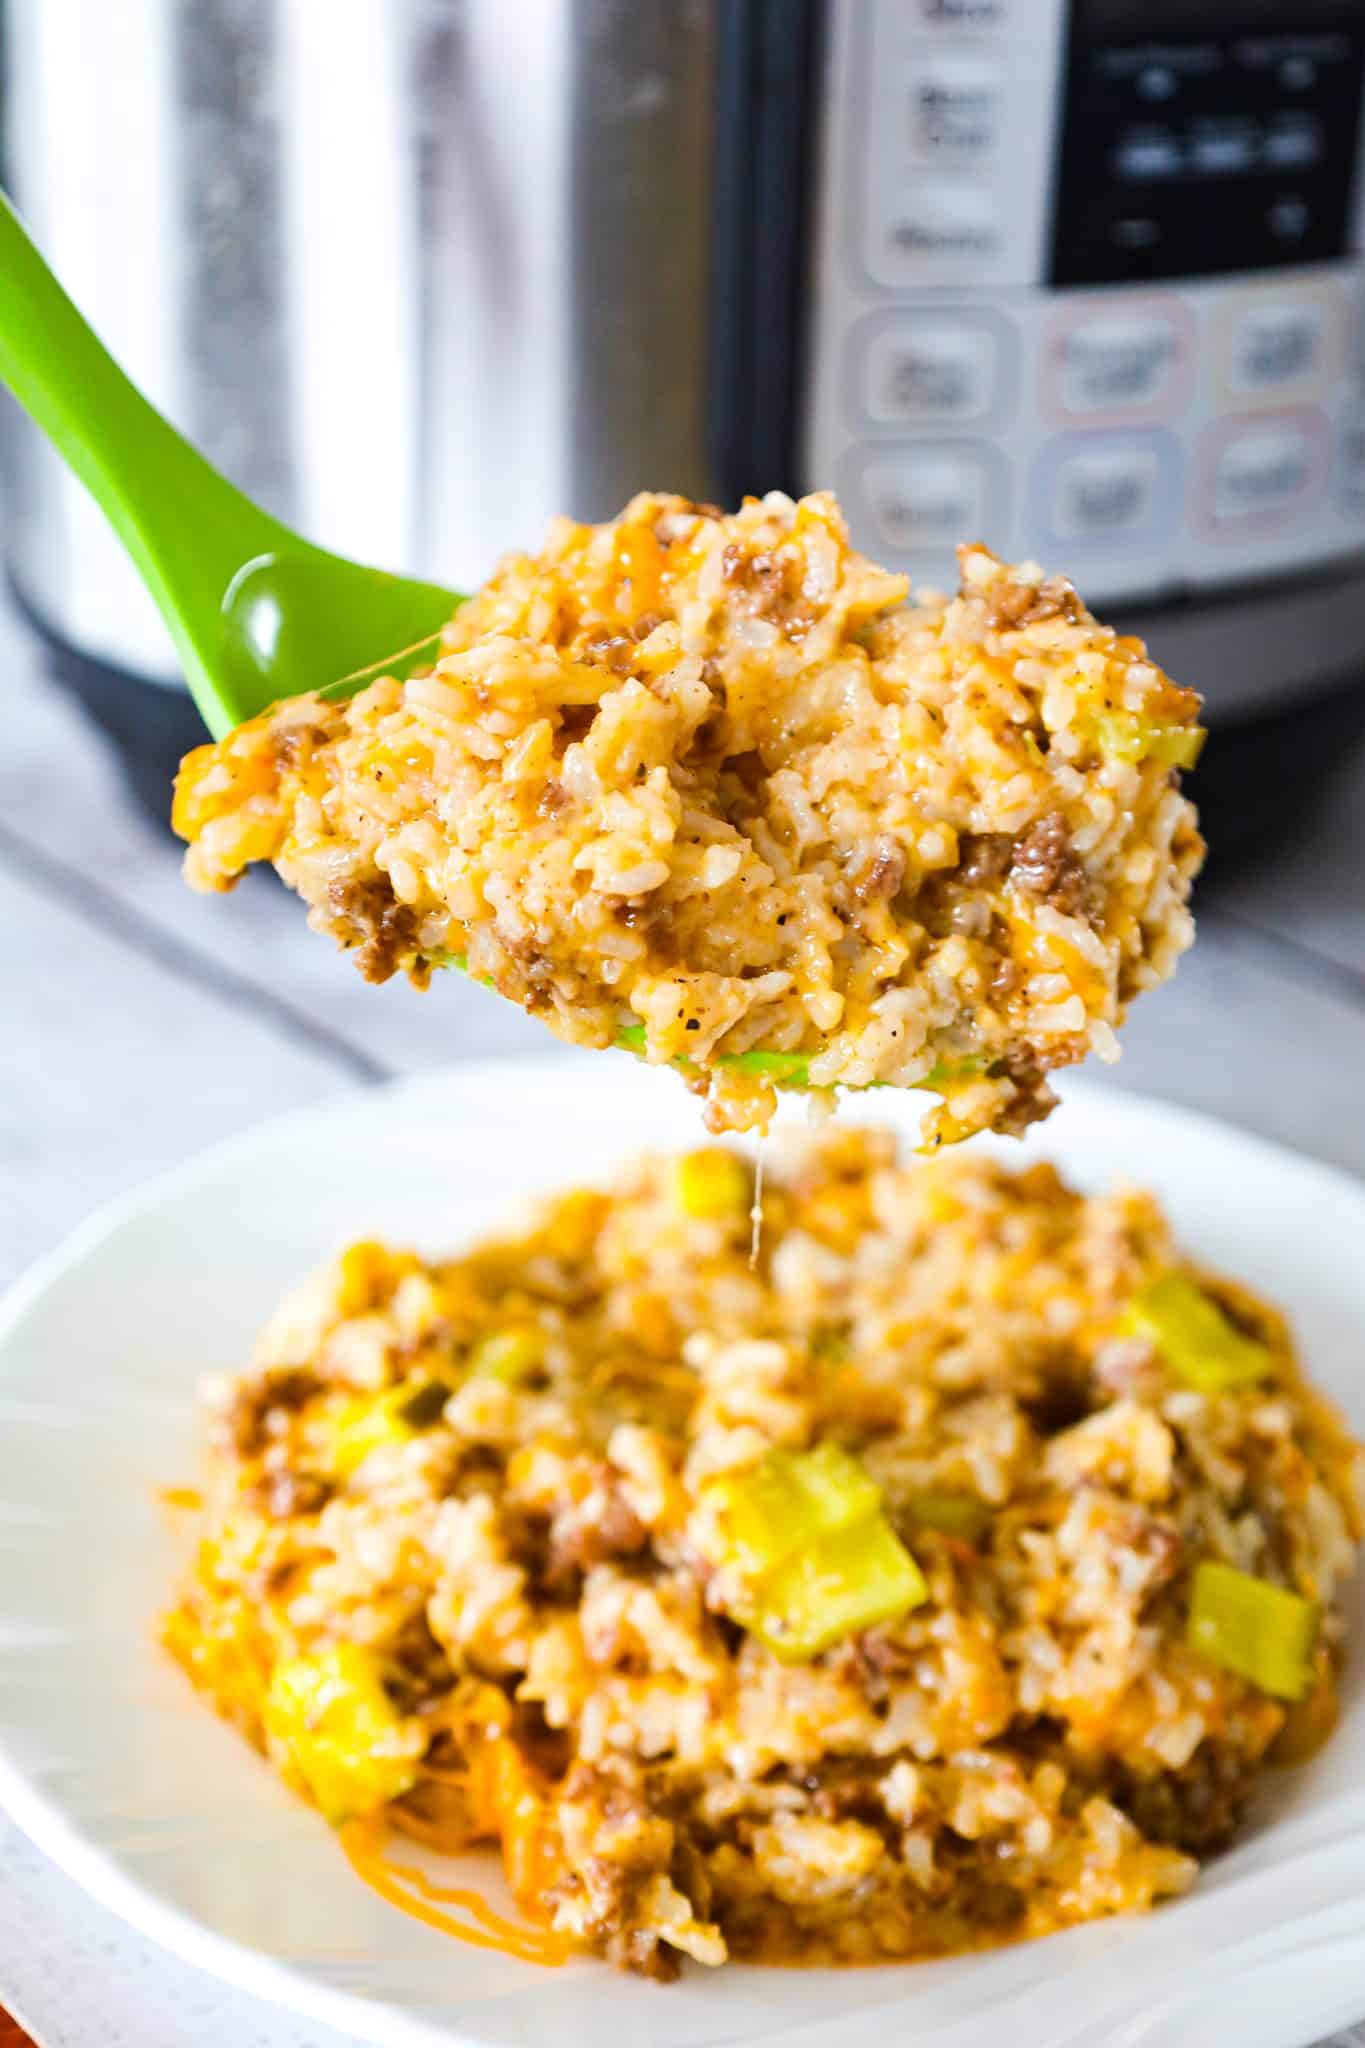 Instant Pot Big Mac Ground Beef and Rice is an easy pressure cooker dinner recipe made with long grain white rice and loaded with crumbled ground beef, diced dill pickles, mayo, Thousand Island dressing and shredded cheddar cheese.